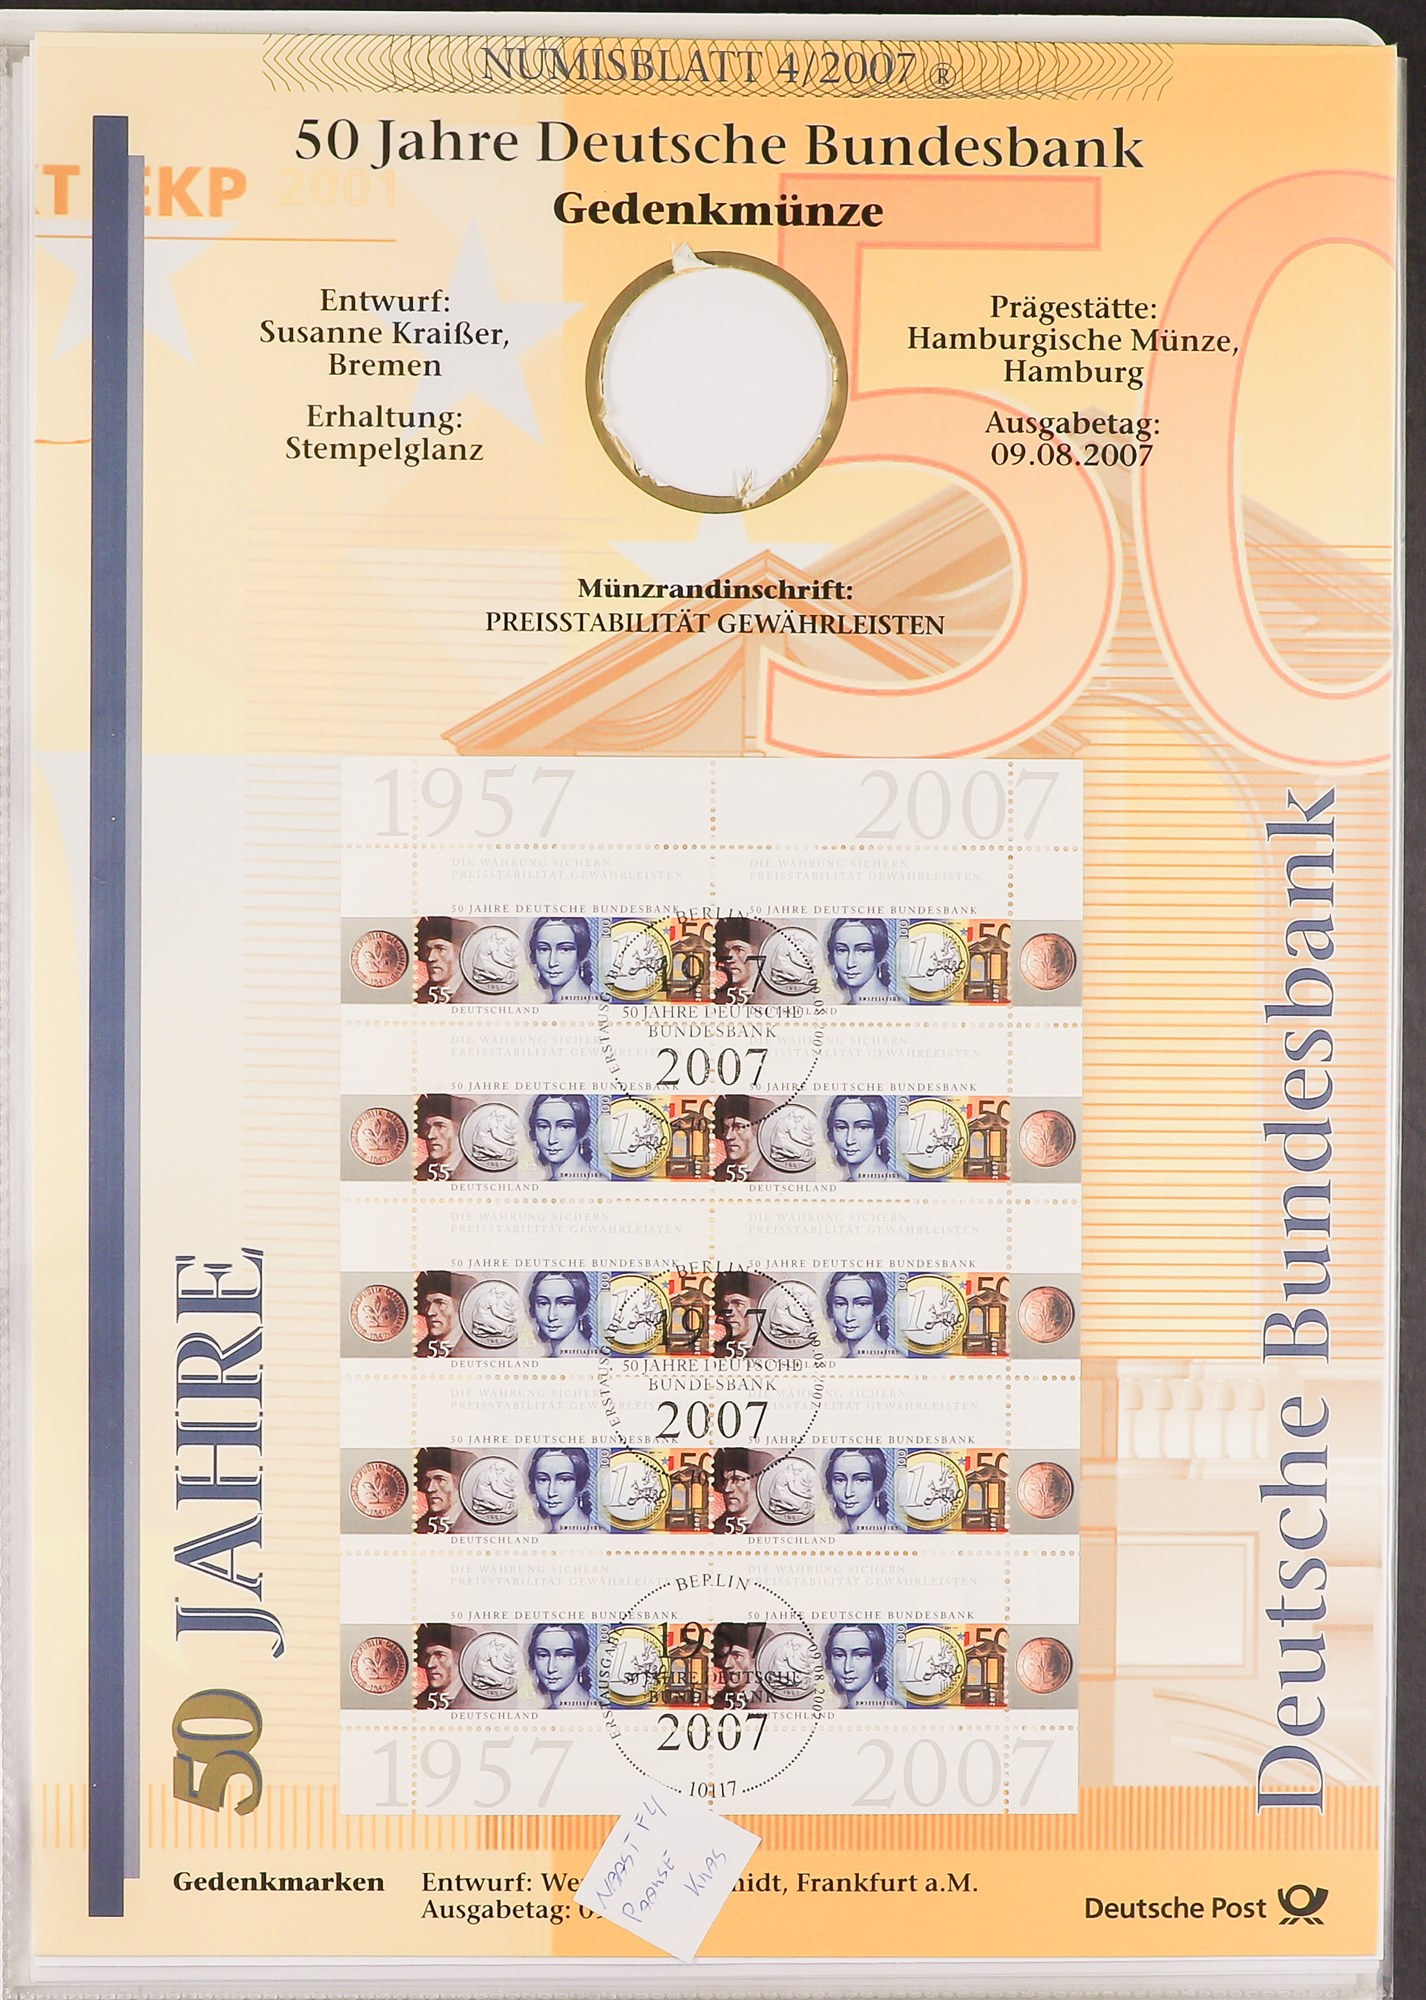 GERMANY WEST 2005 - 2009 SPECIALIZED COLLECTION of 1000+ mint, never hinged mint & used stamps, - Image 11 of 19